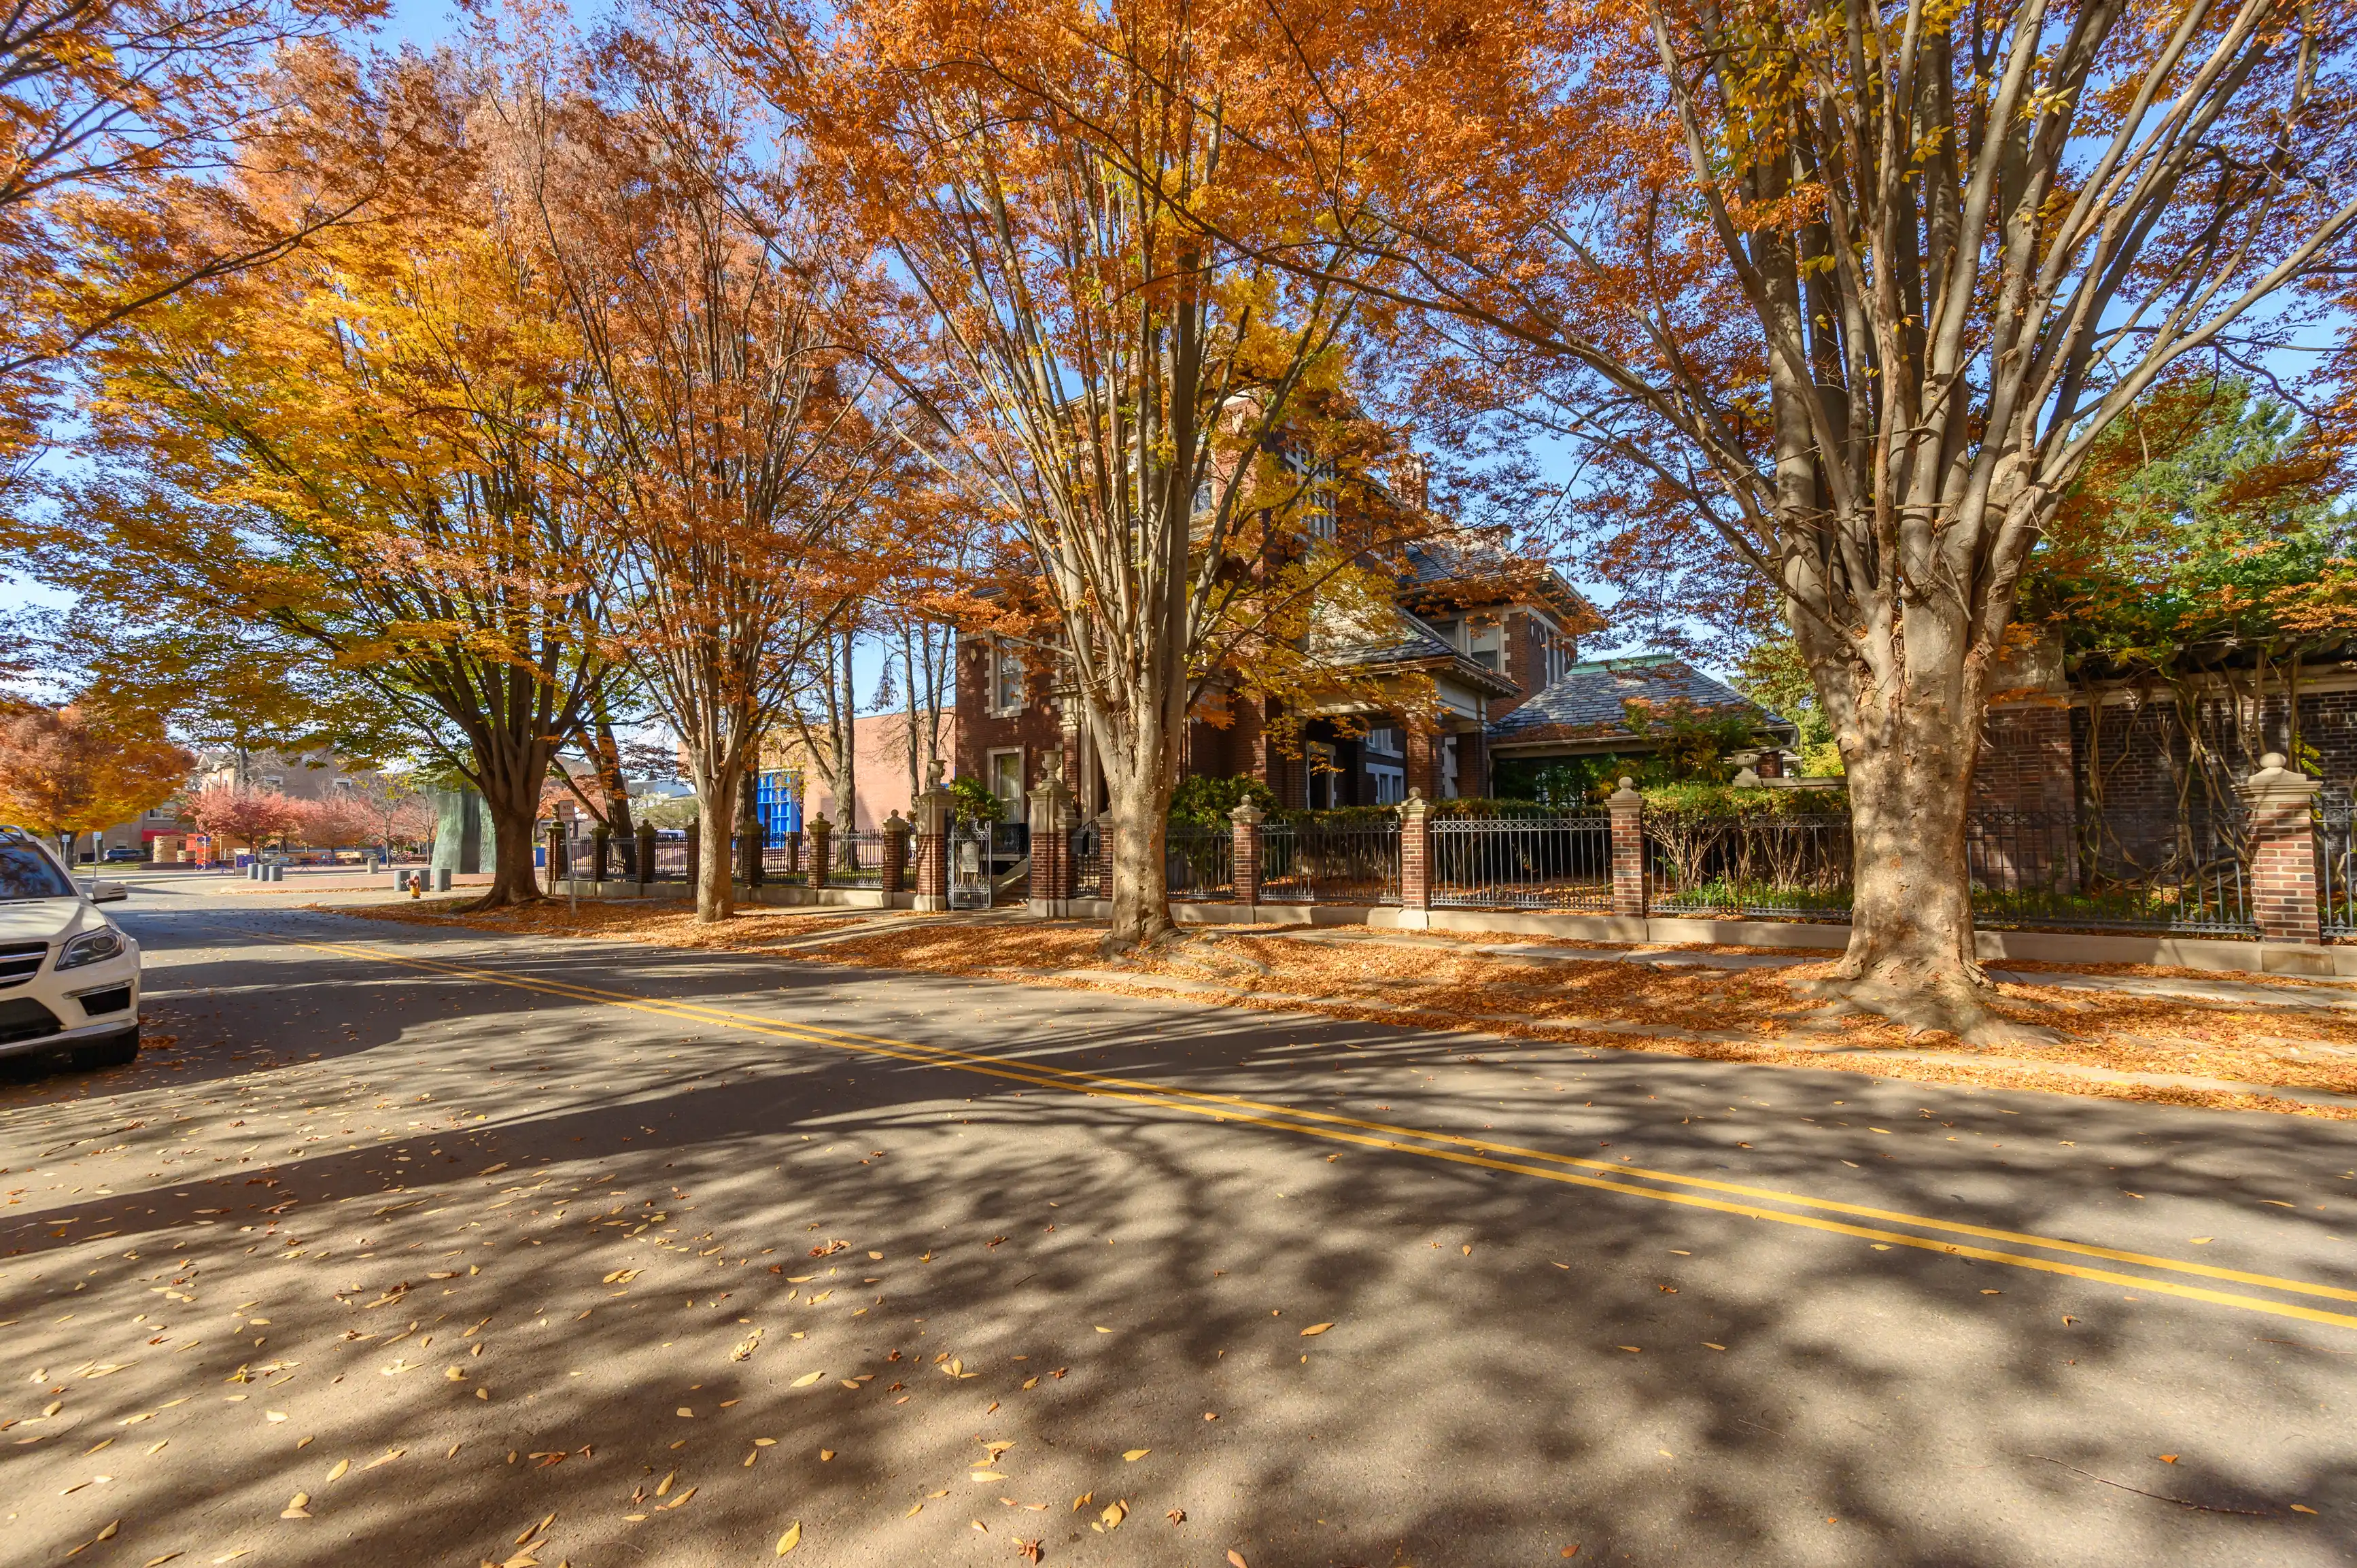 Tree-lined street with autumn foliage, cast shadows on road, residential area with parked car and iron fence around properties.